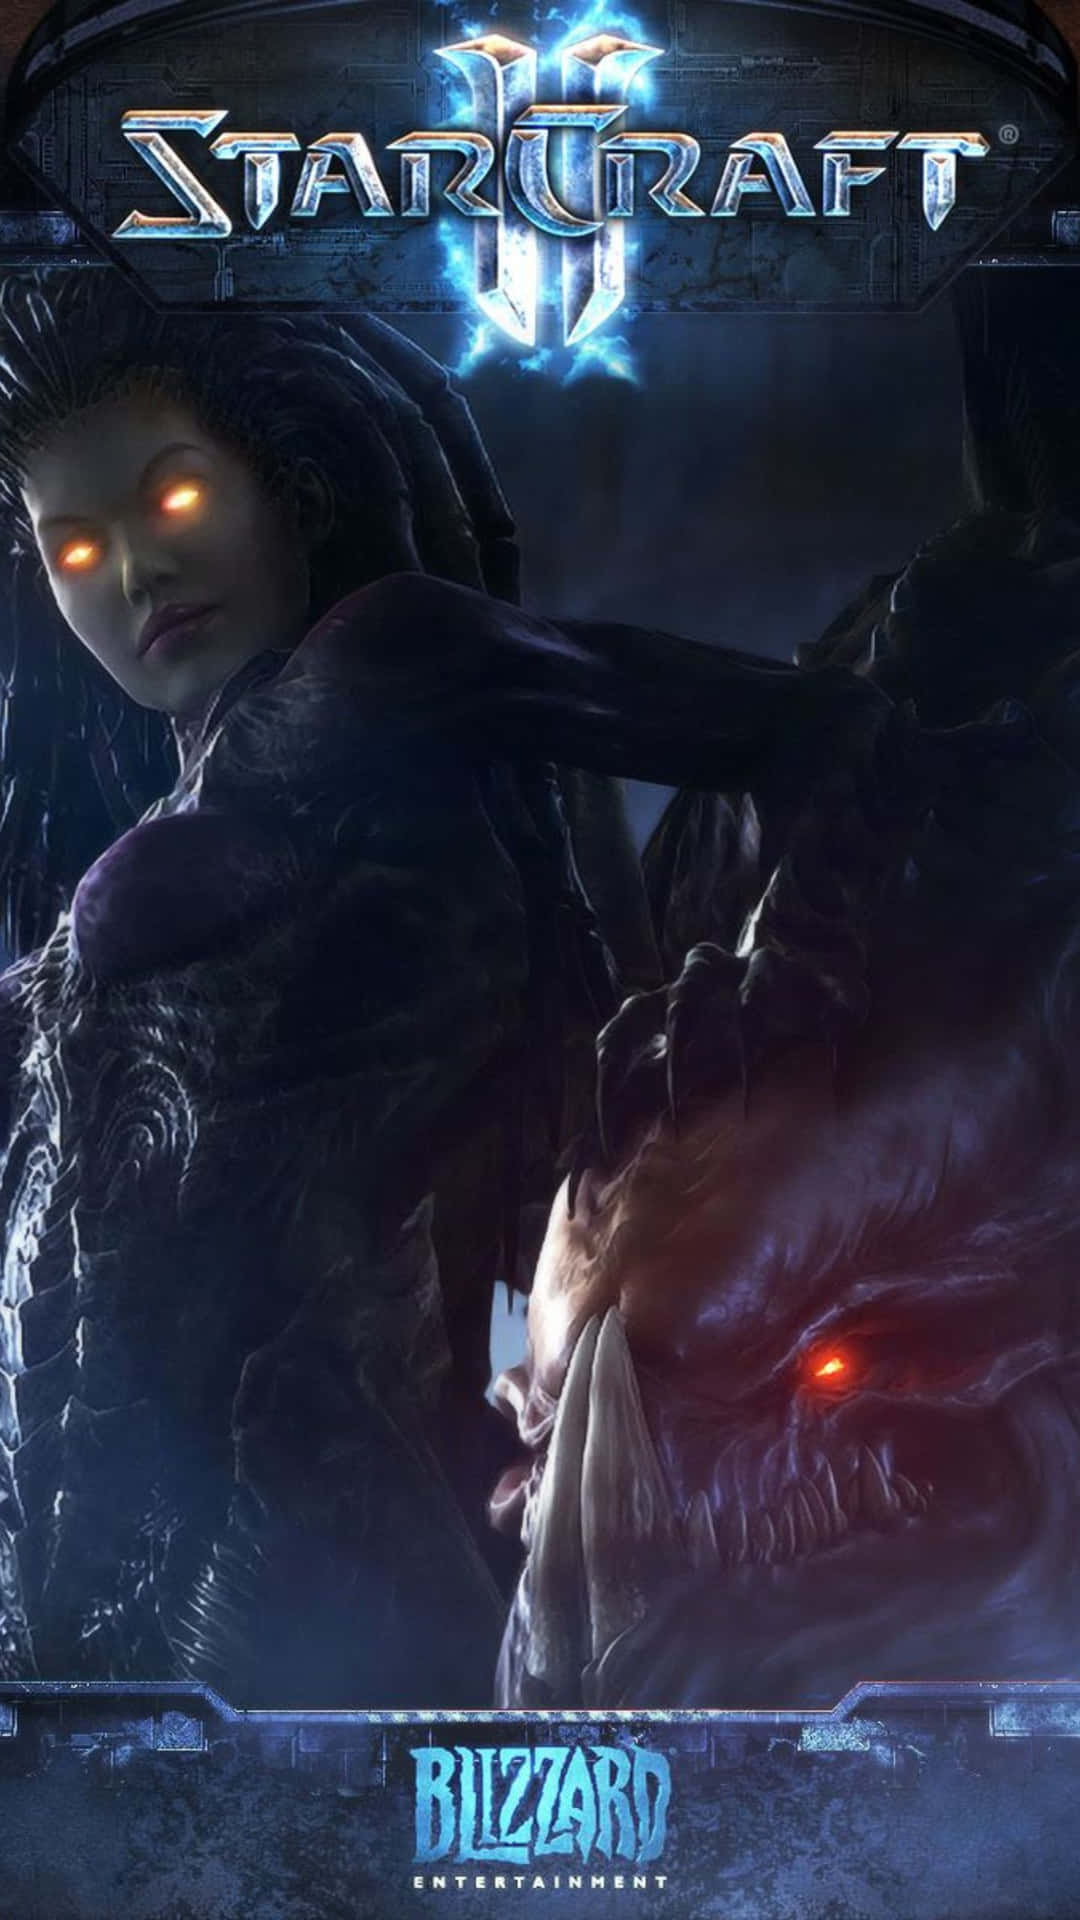 Achieve Excellence with Android's Starcraft II